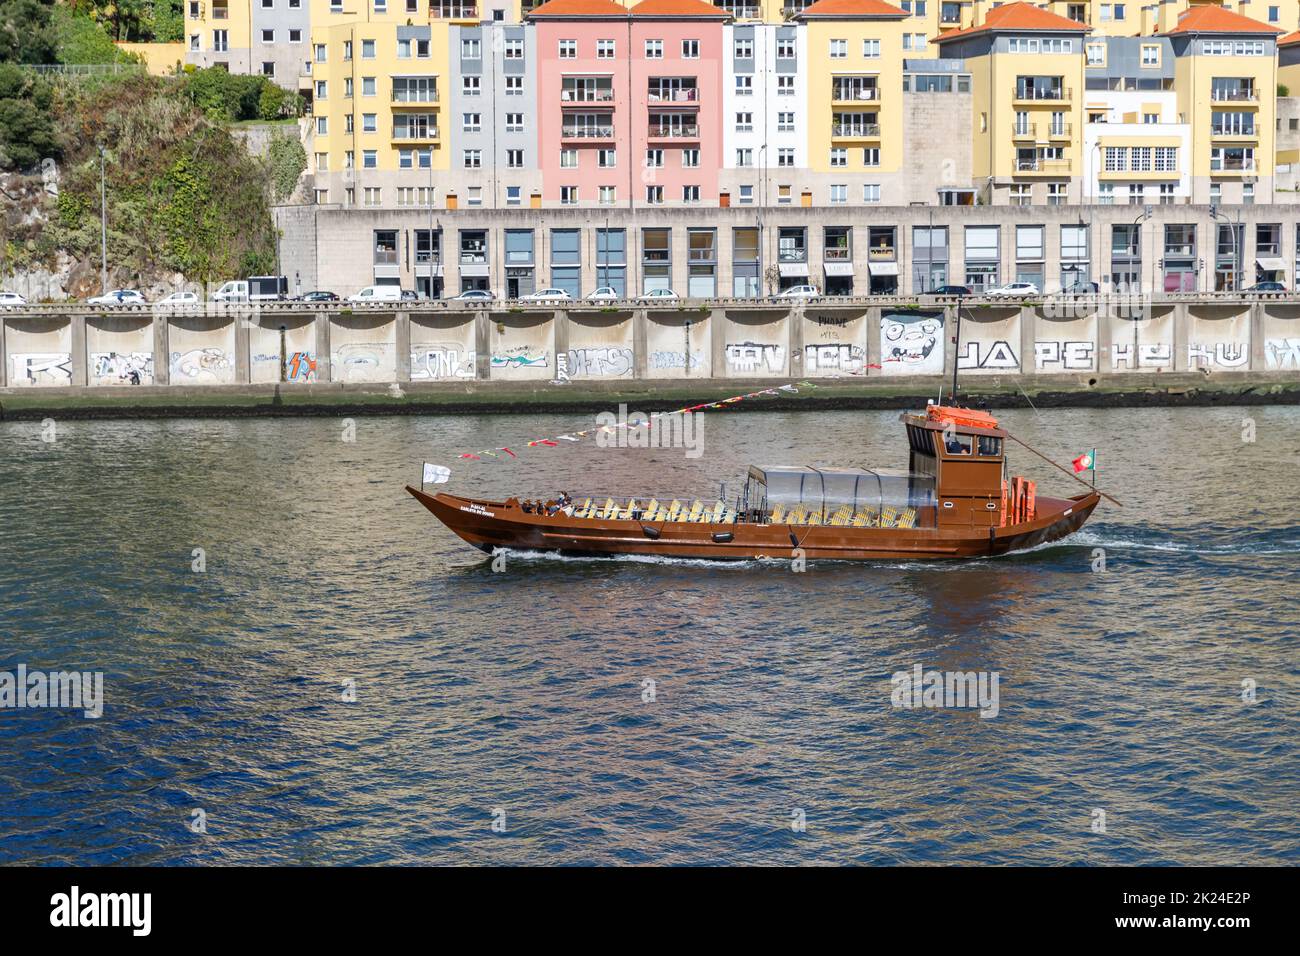 Porto, Portugal - October 23, 2020: Carlota do Douro tourist transport boat sailing on the Douro river showing the ancient city to visitors on an autu Stock Photo